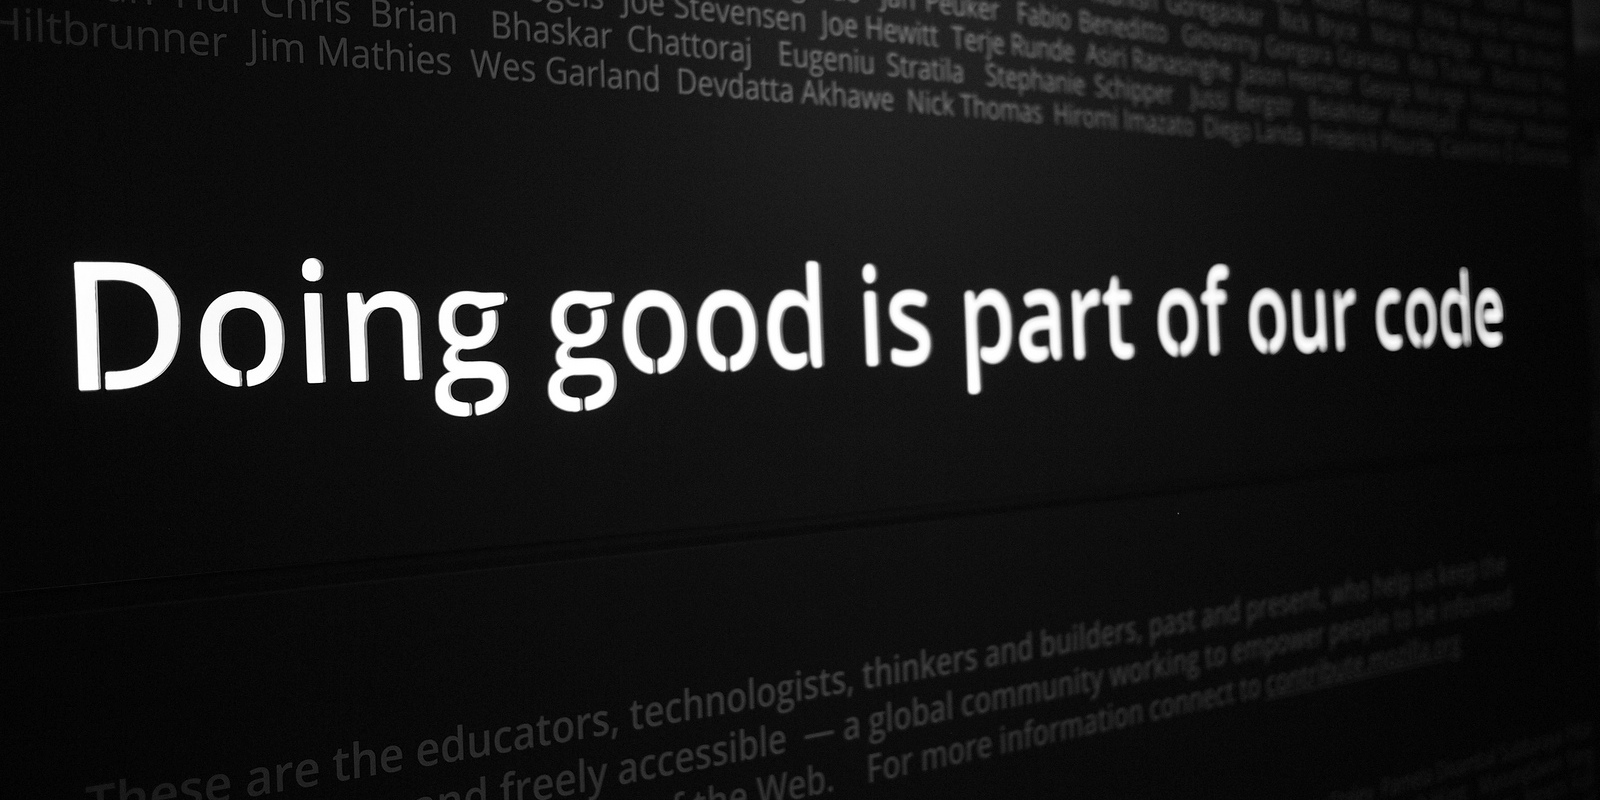 Doing good is part of our code